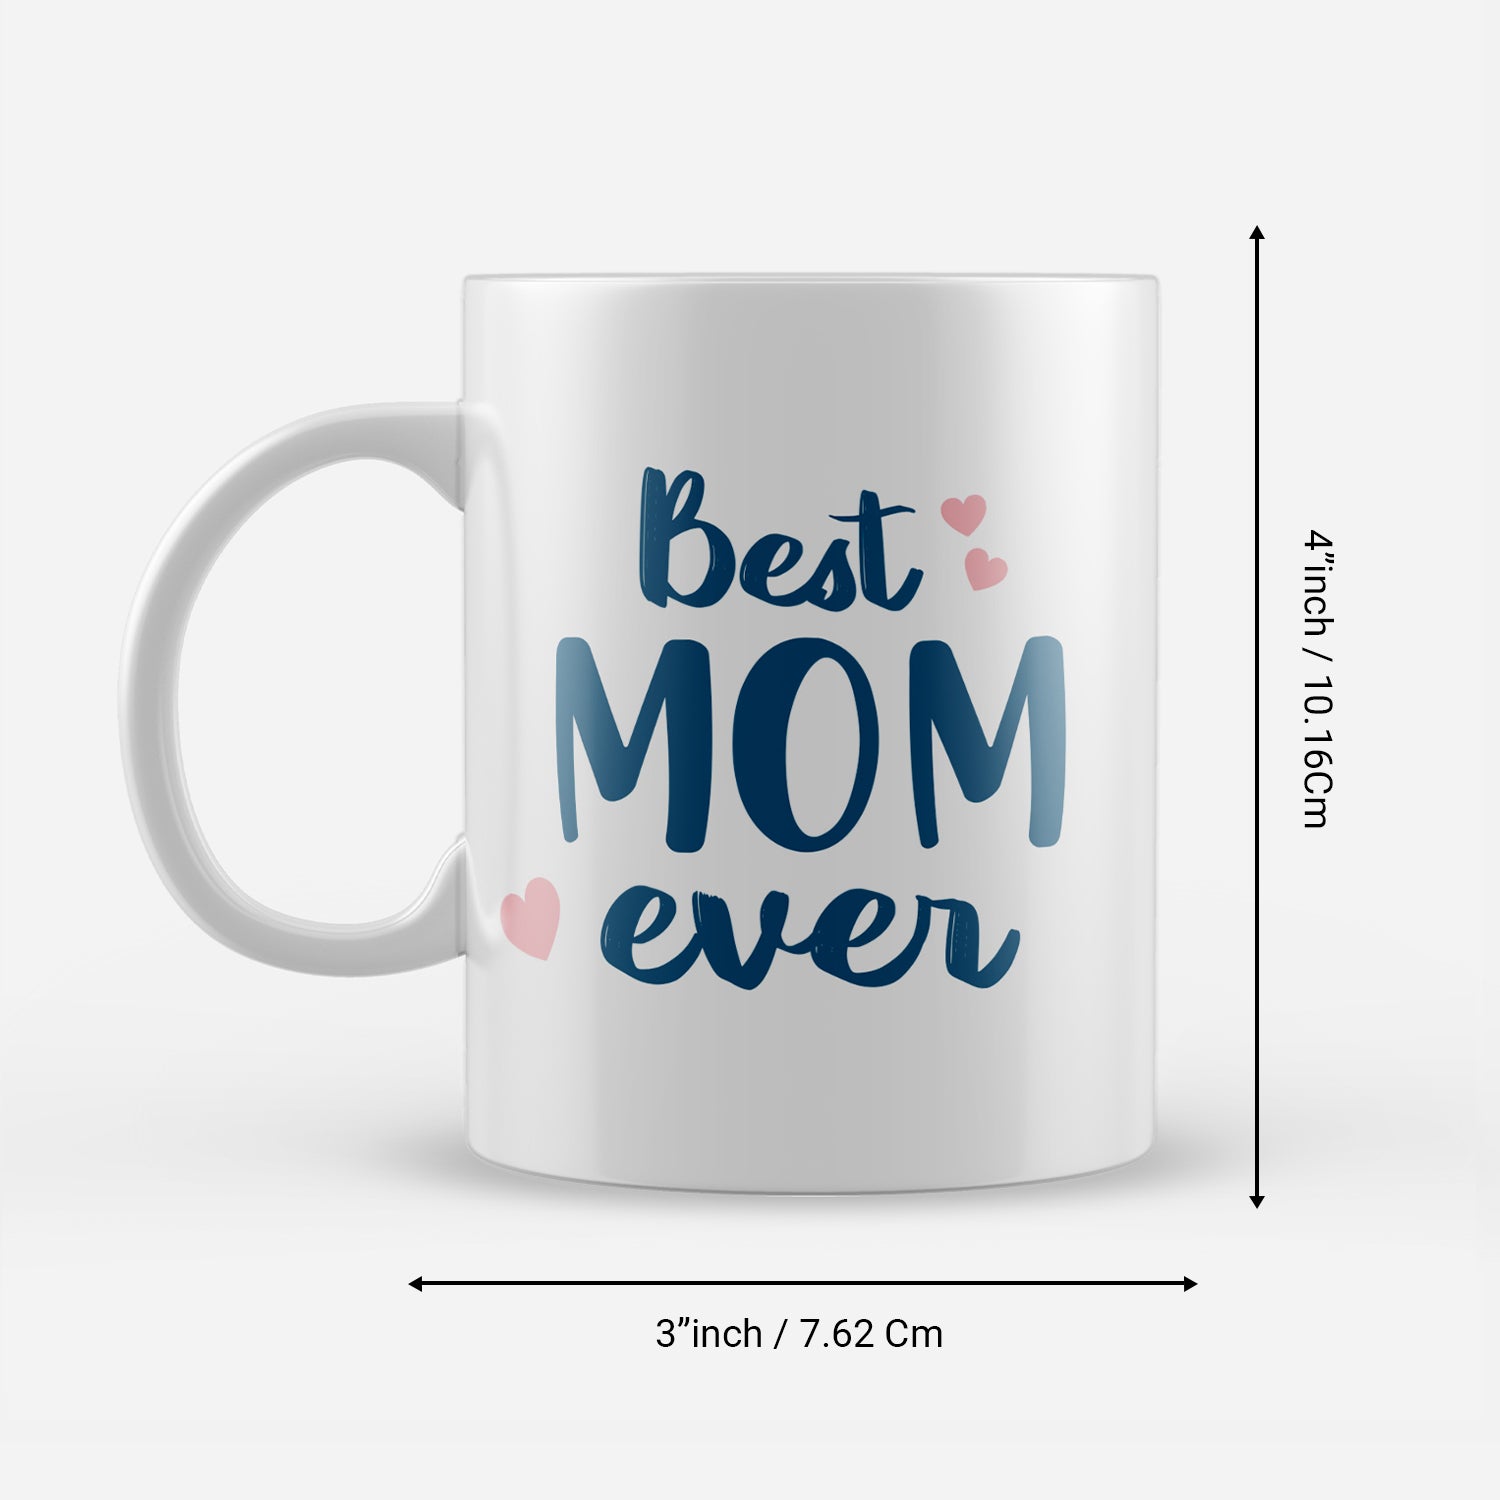 Best Mom Ever Mother's Day theme Ceramic Coffee Mugs 3